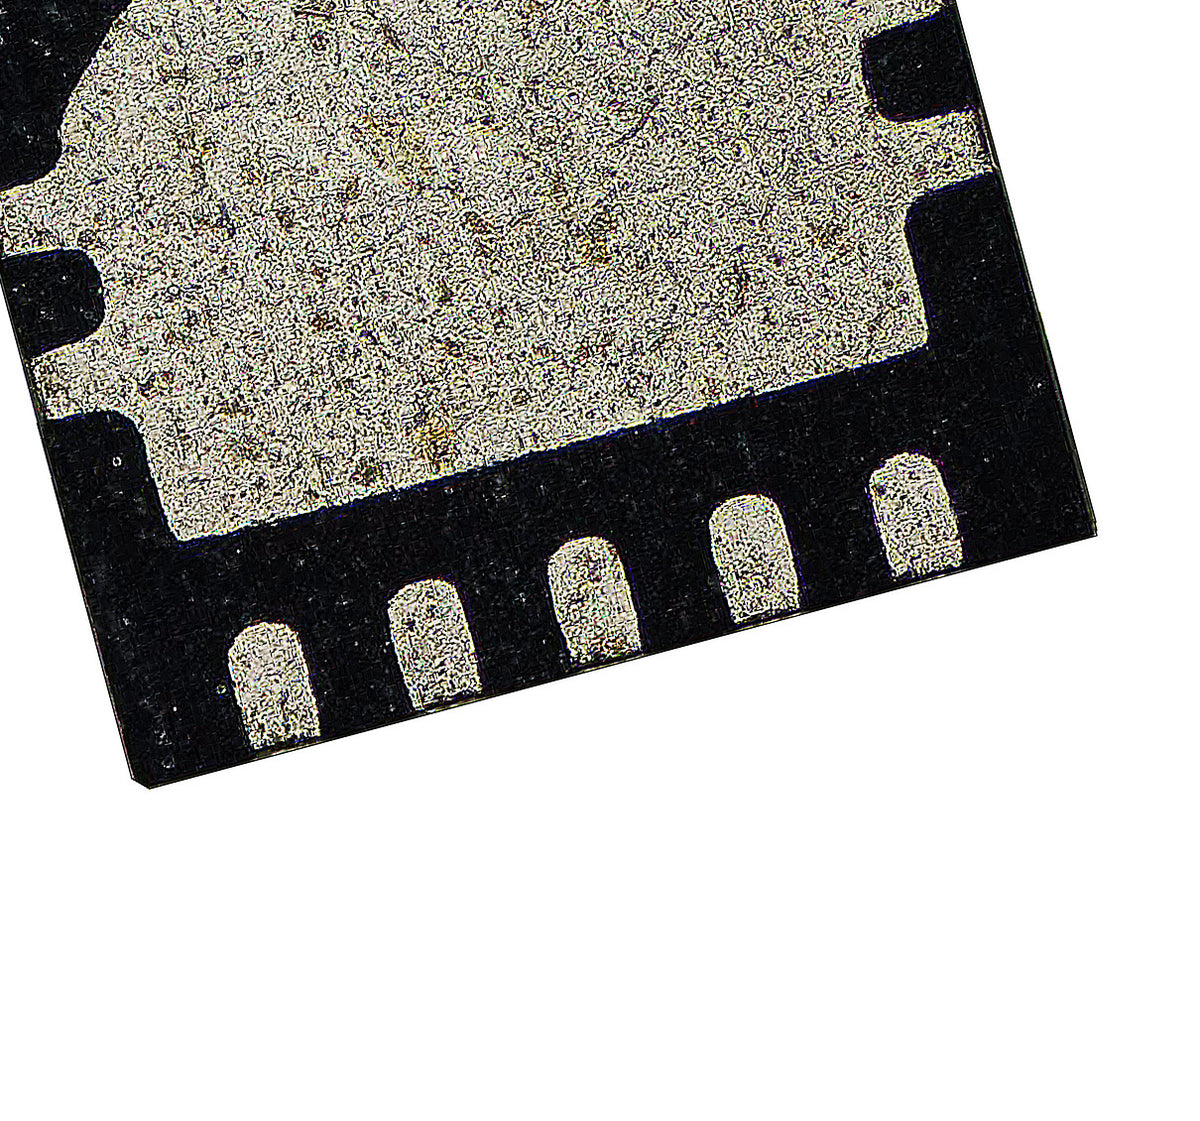 SINGLE SYNCHRONOUS STEP-DOWN CONTROLLER IC COMPATIBLE WITH MACBOOKS (TPS51211DSCR / TPS51211 / S51211: QFN-10 PIN)